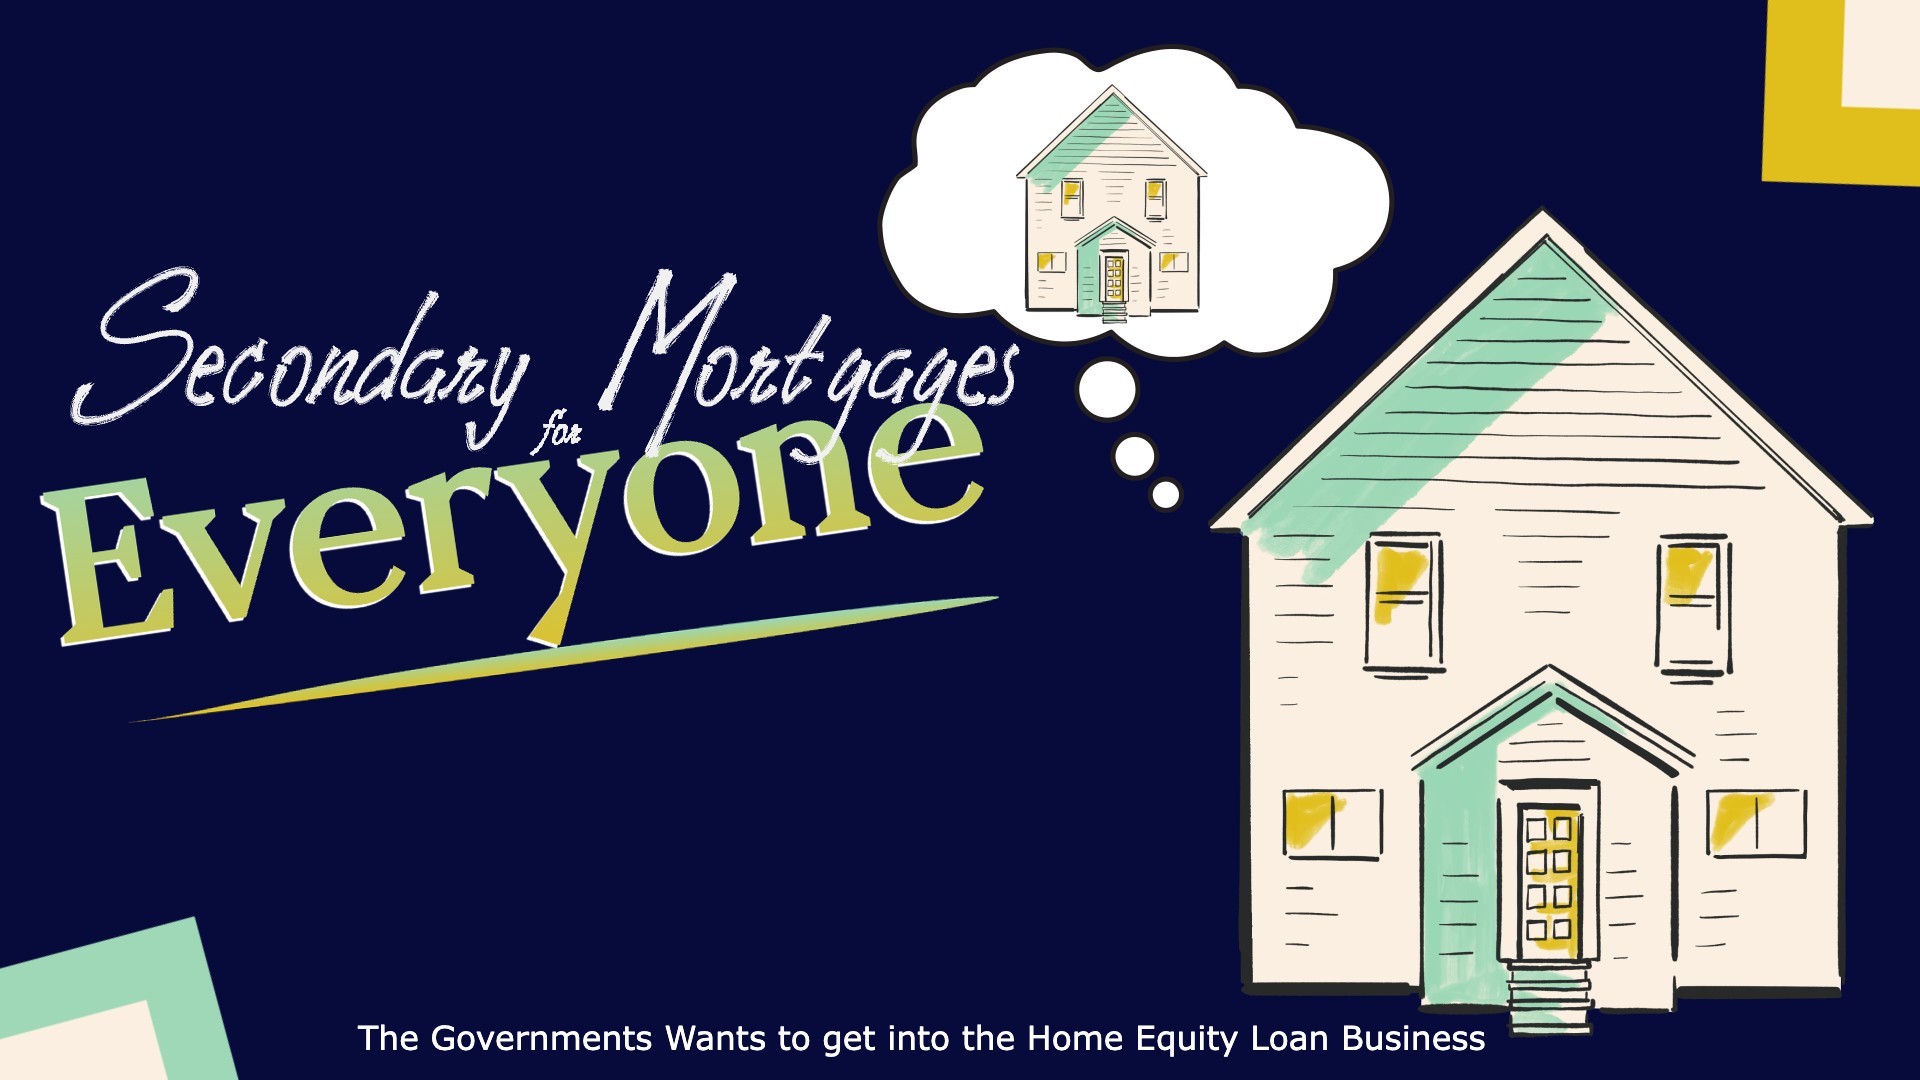 Secondary Mortgages for Everyone! The Government wants to get into the Home Equity Loan Business